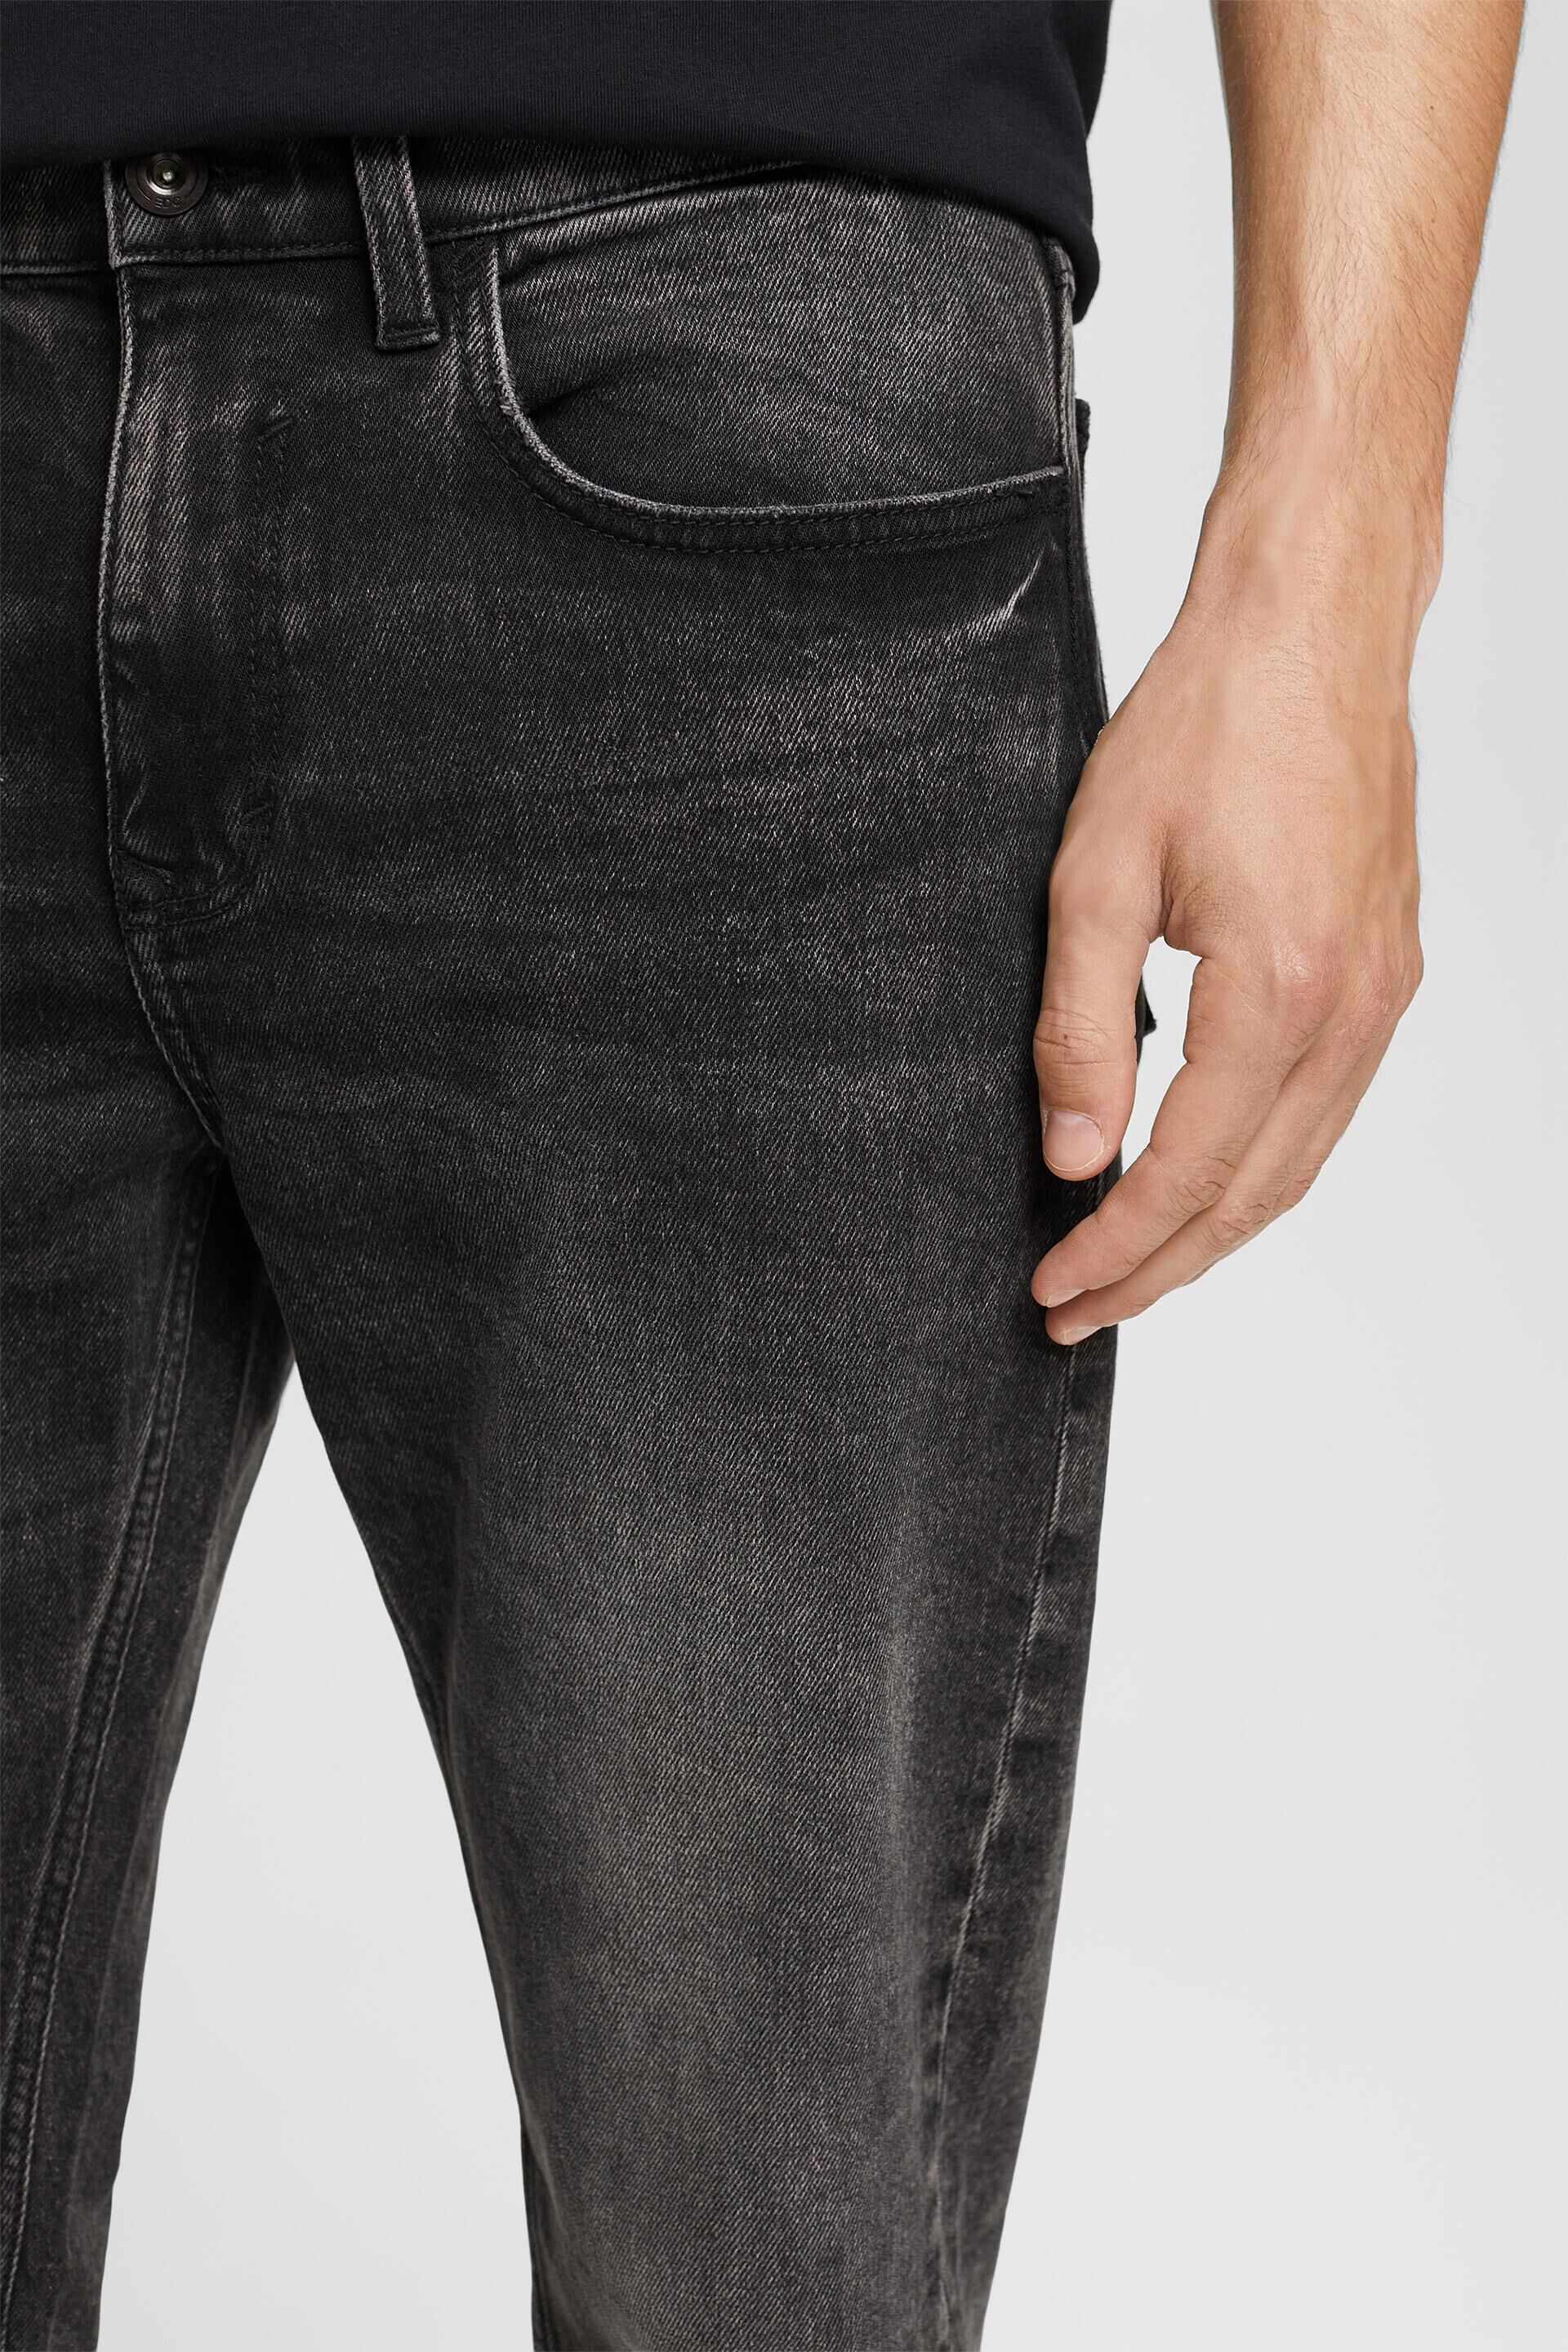 Washed stretch jeans at our shop ESPRIT